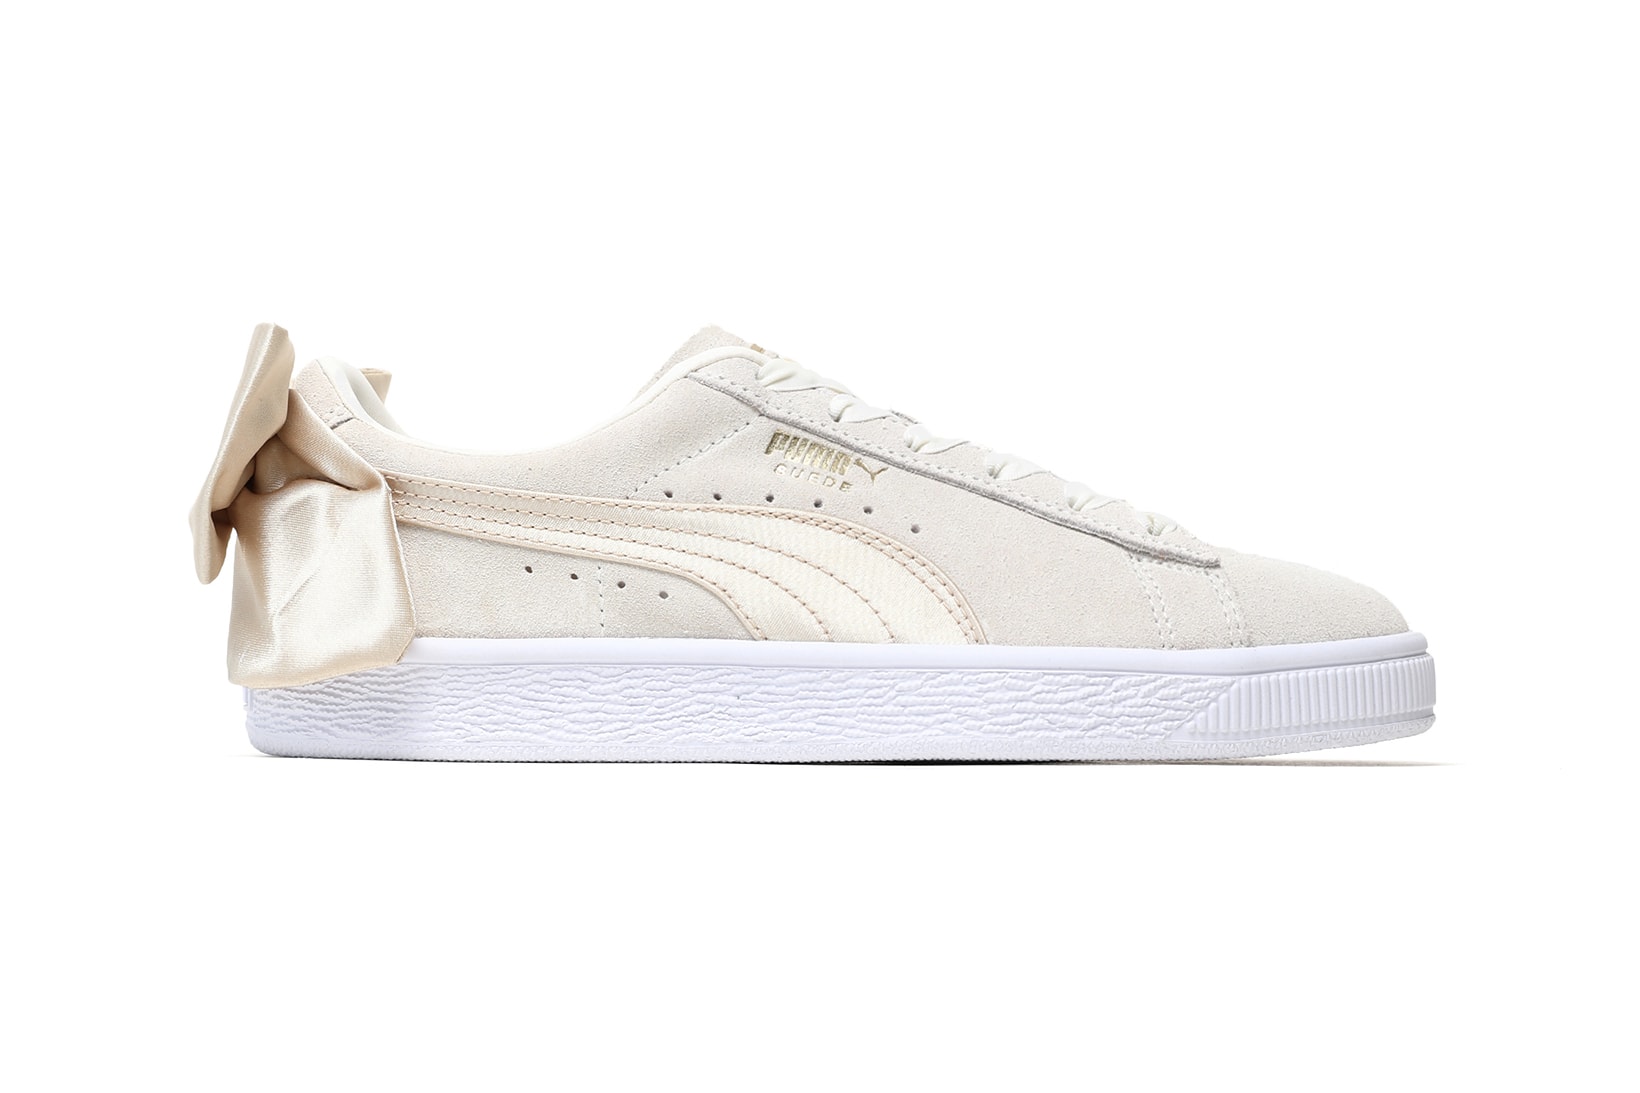 PUMA Suede Bow Varsity Marshmallow Women's Sneakers